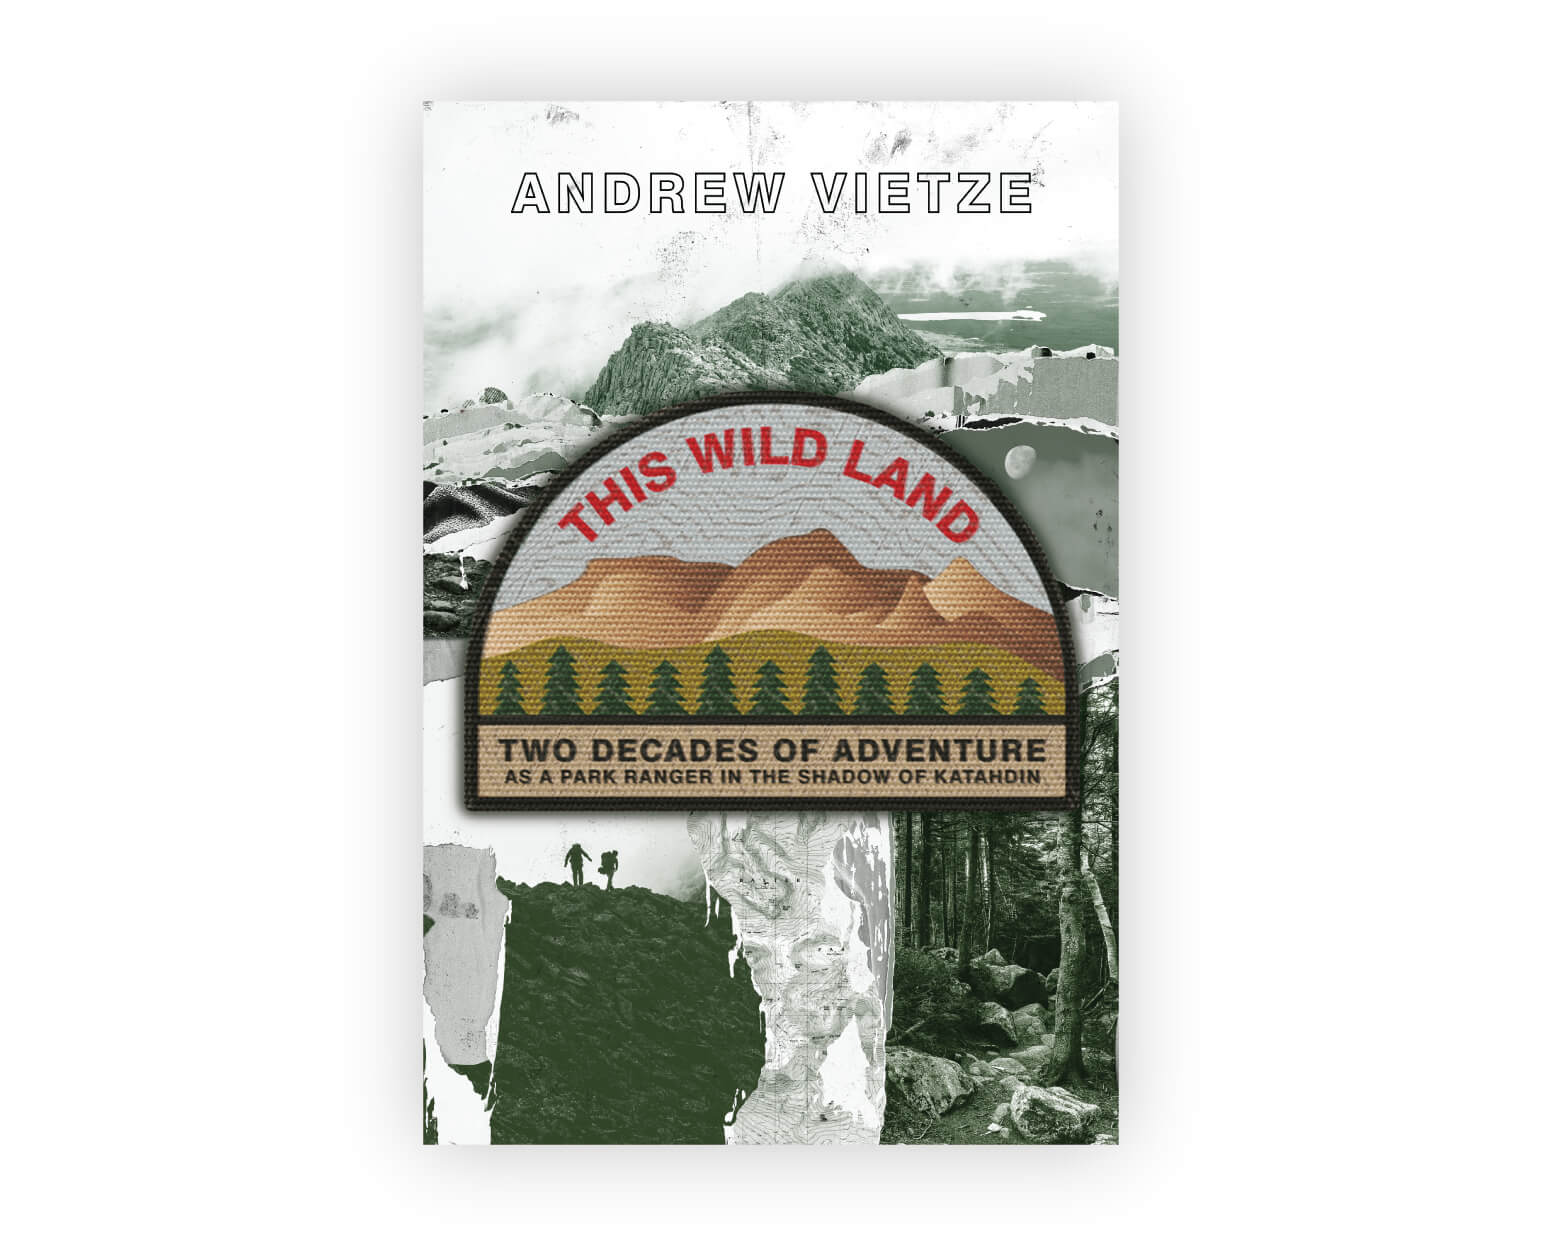 This Wild Land book cover